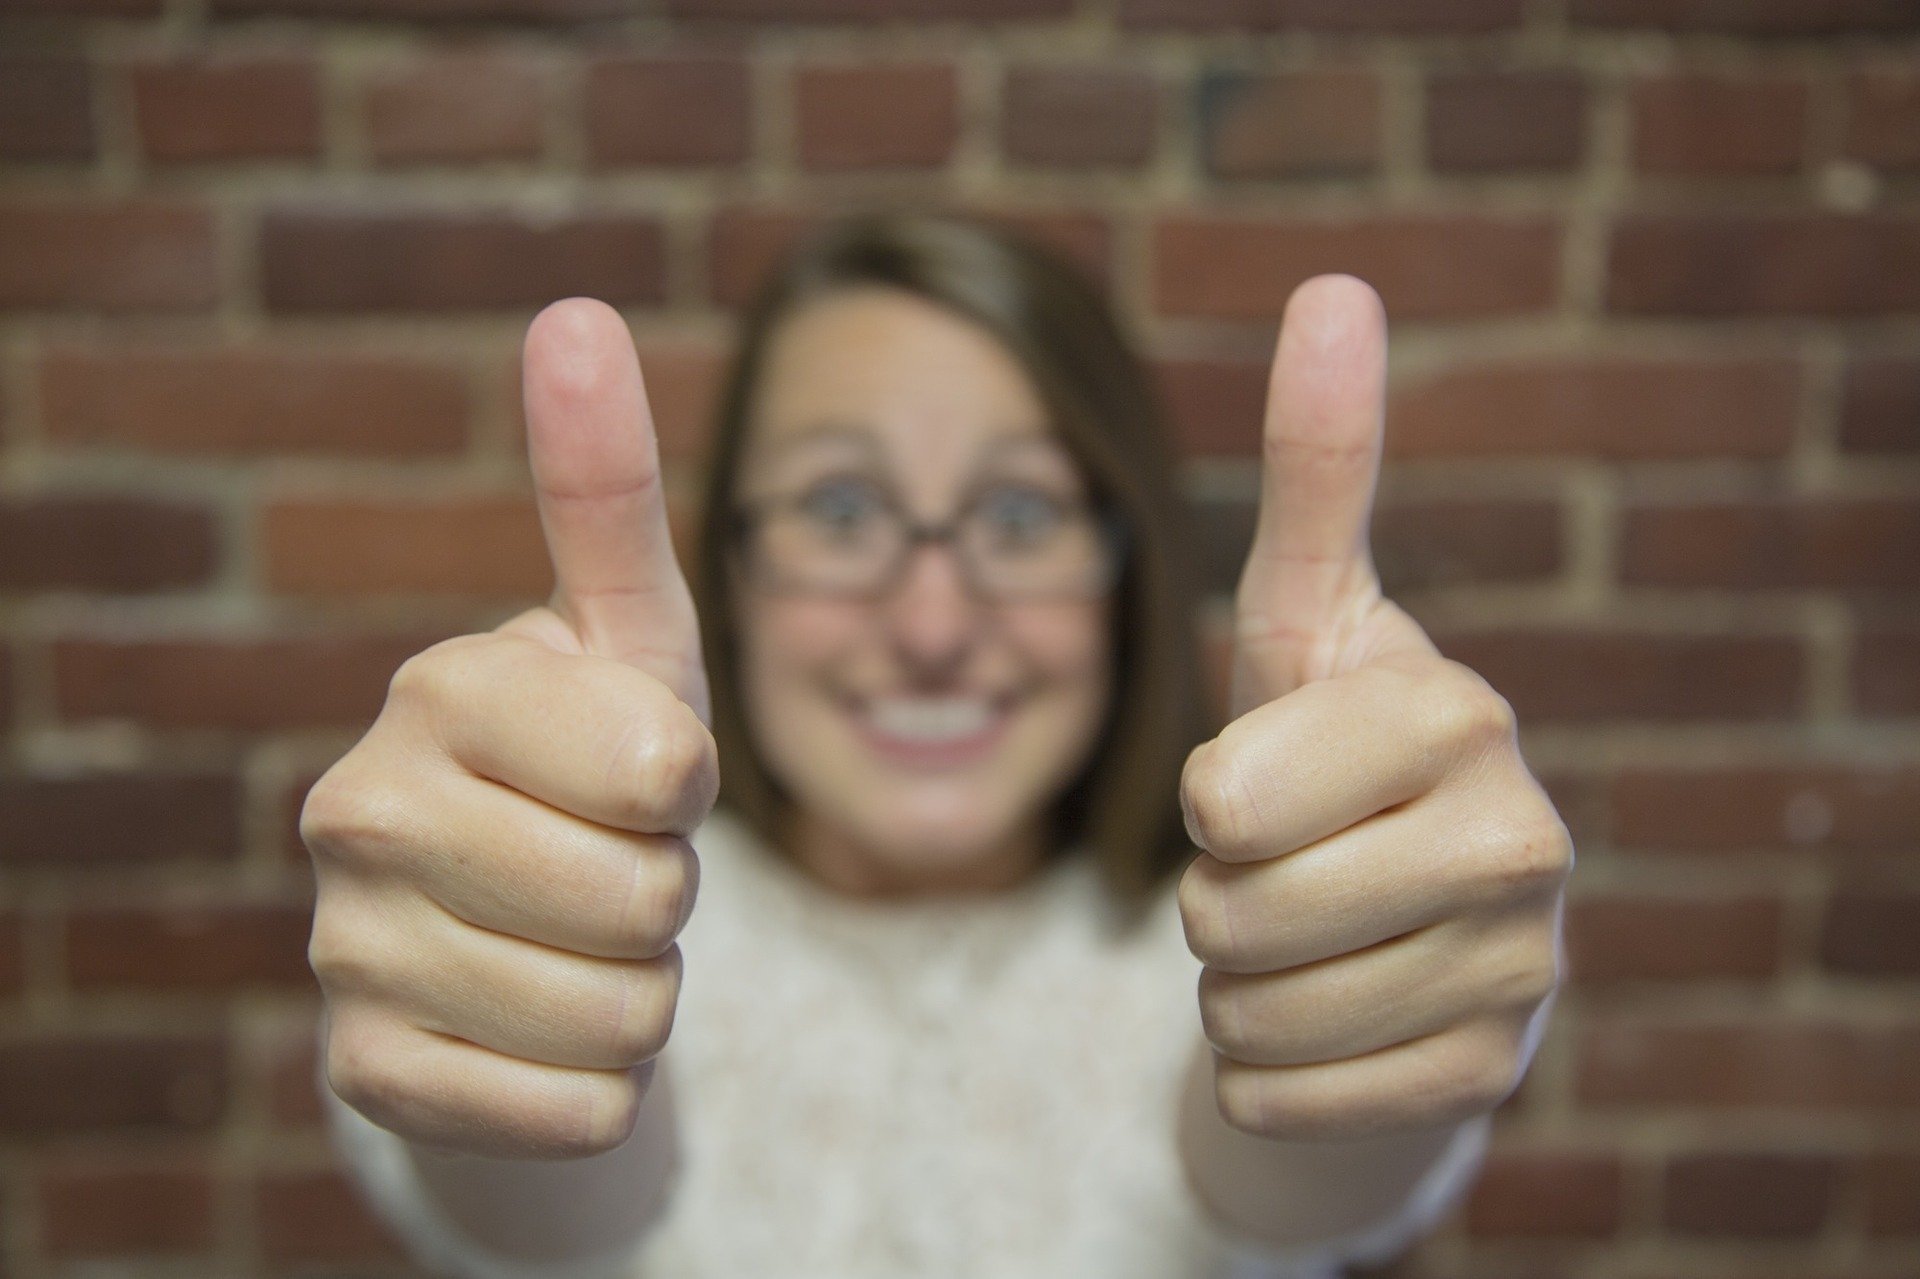 Blurred image of a person holding up two thumbs ups